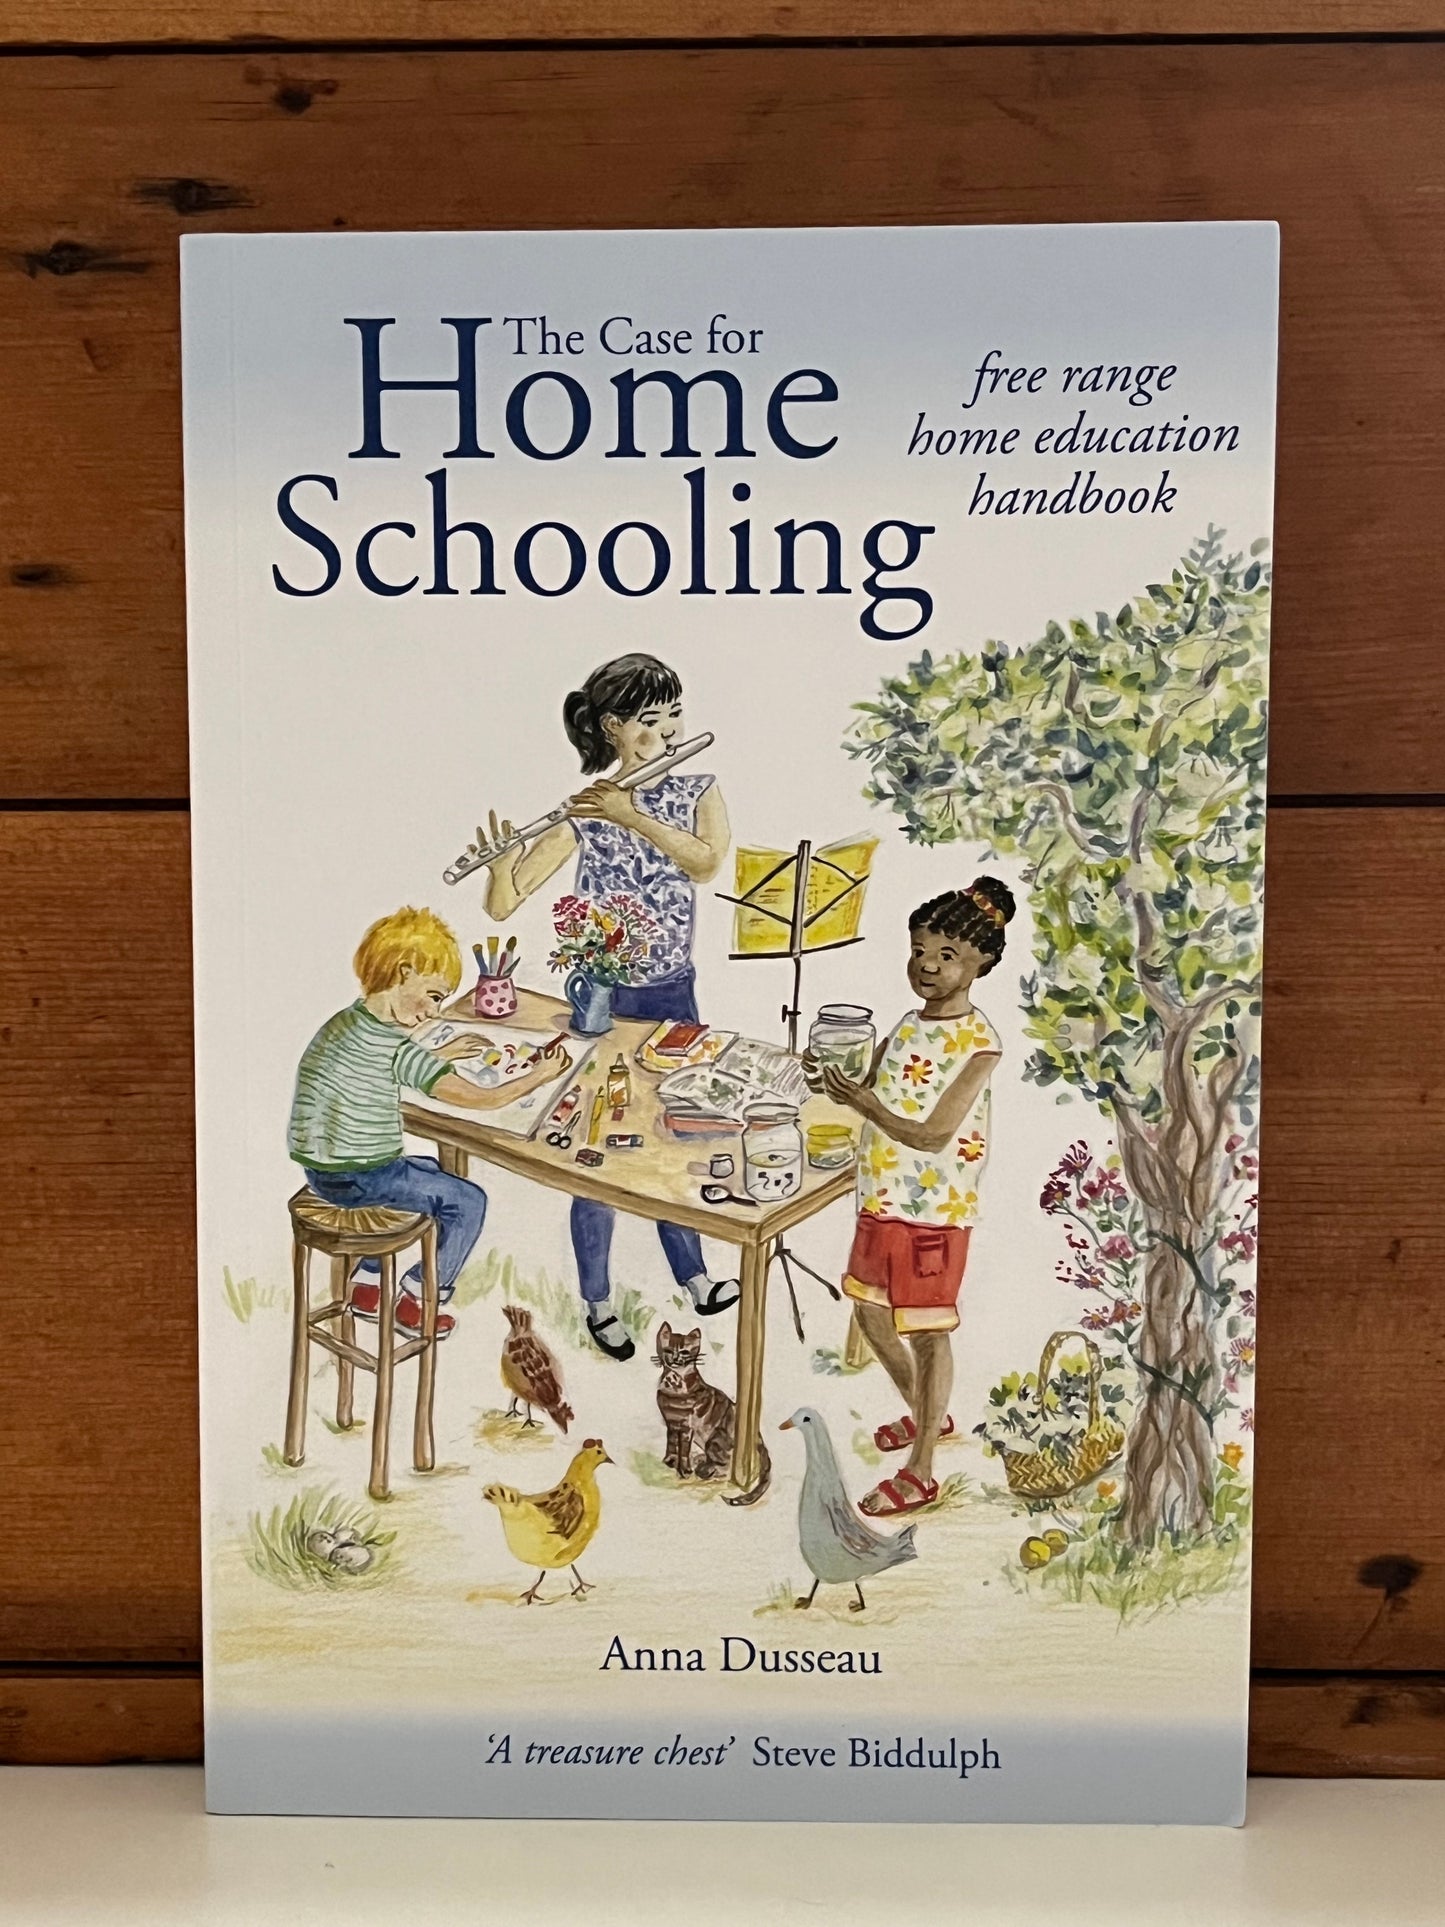 Parenting Resource Book - THE CASE FOR HOMESCHOOLING